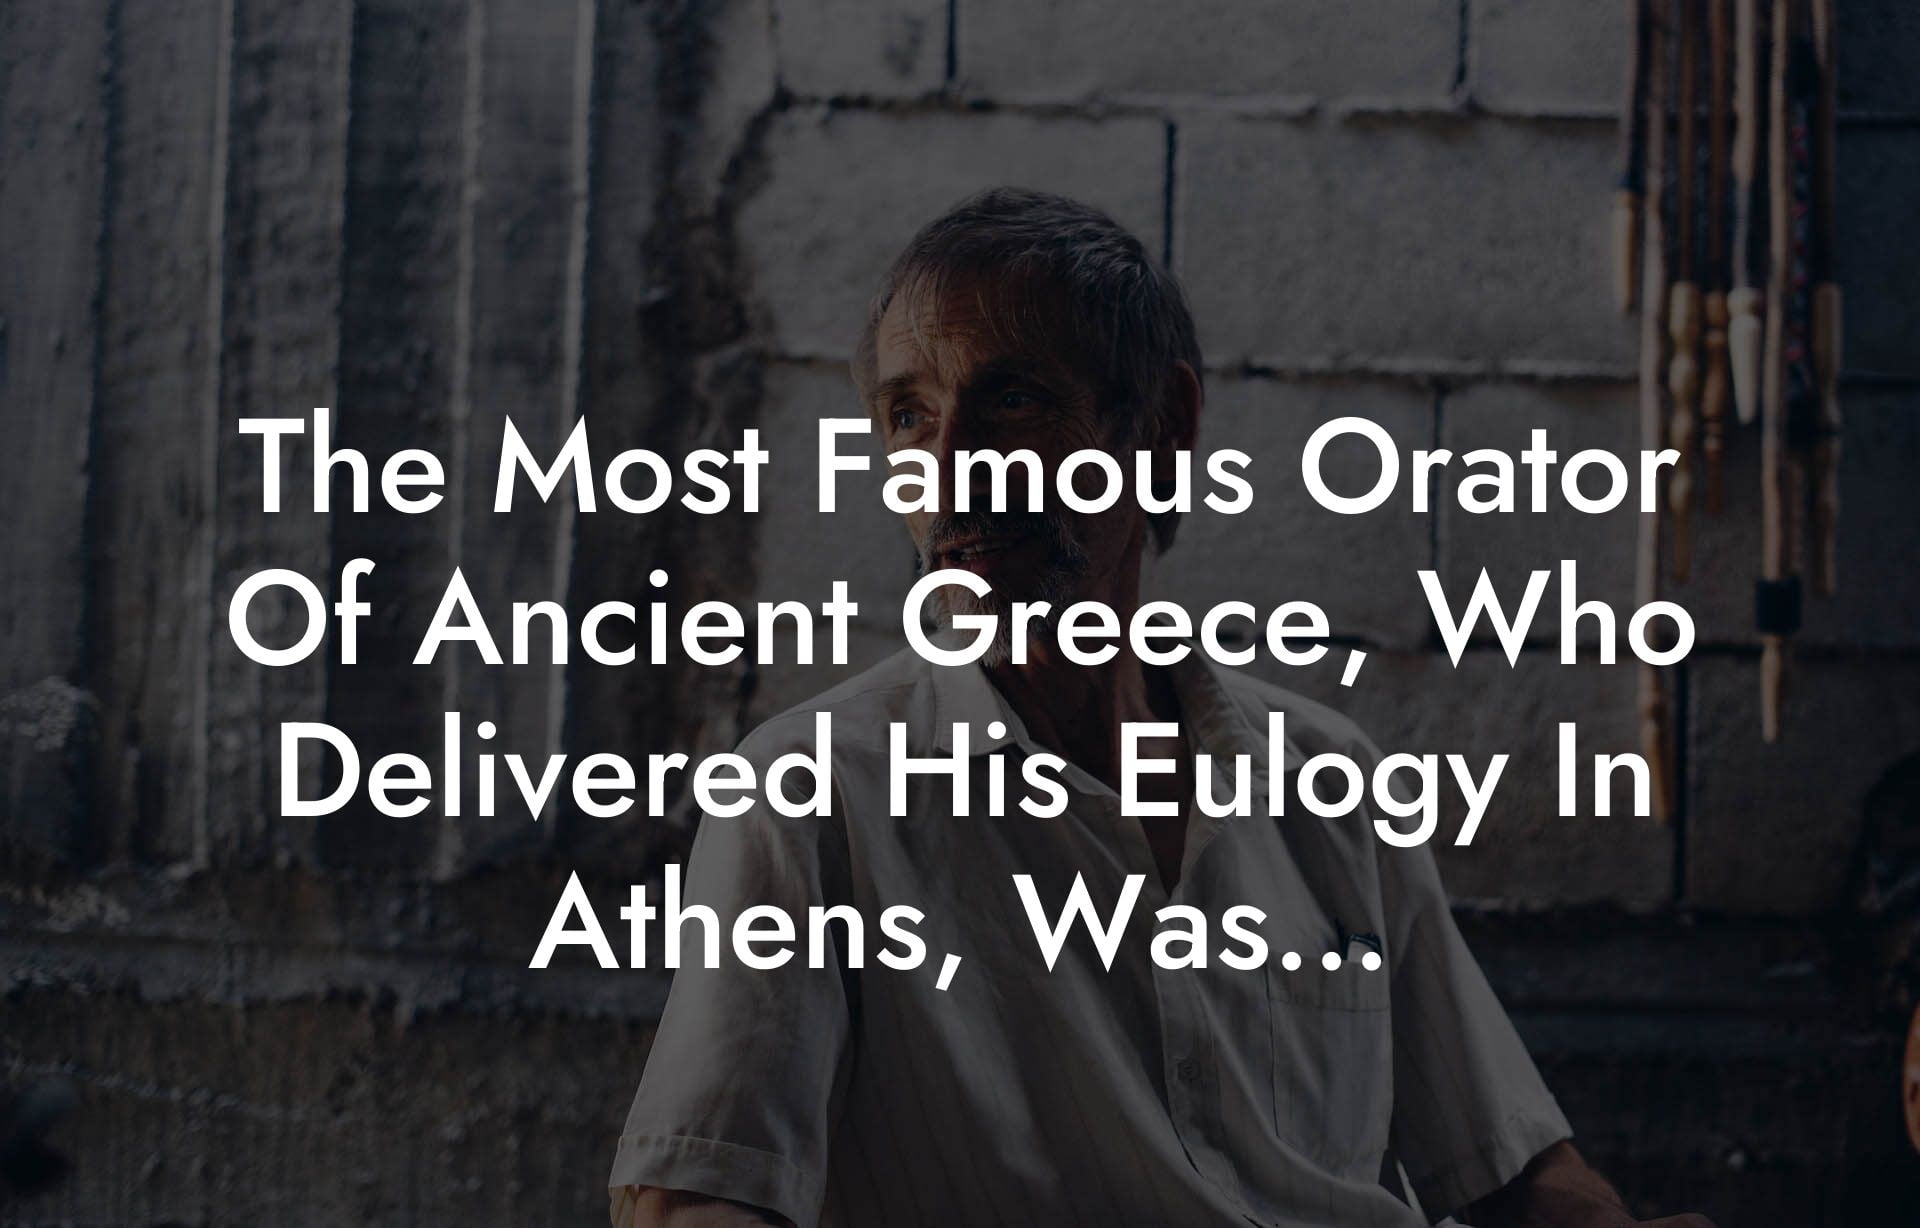 The Most Famous Orator Of Ancient Greece, Who Delivered His Eulogy In Athens, Was…